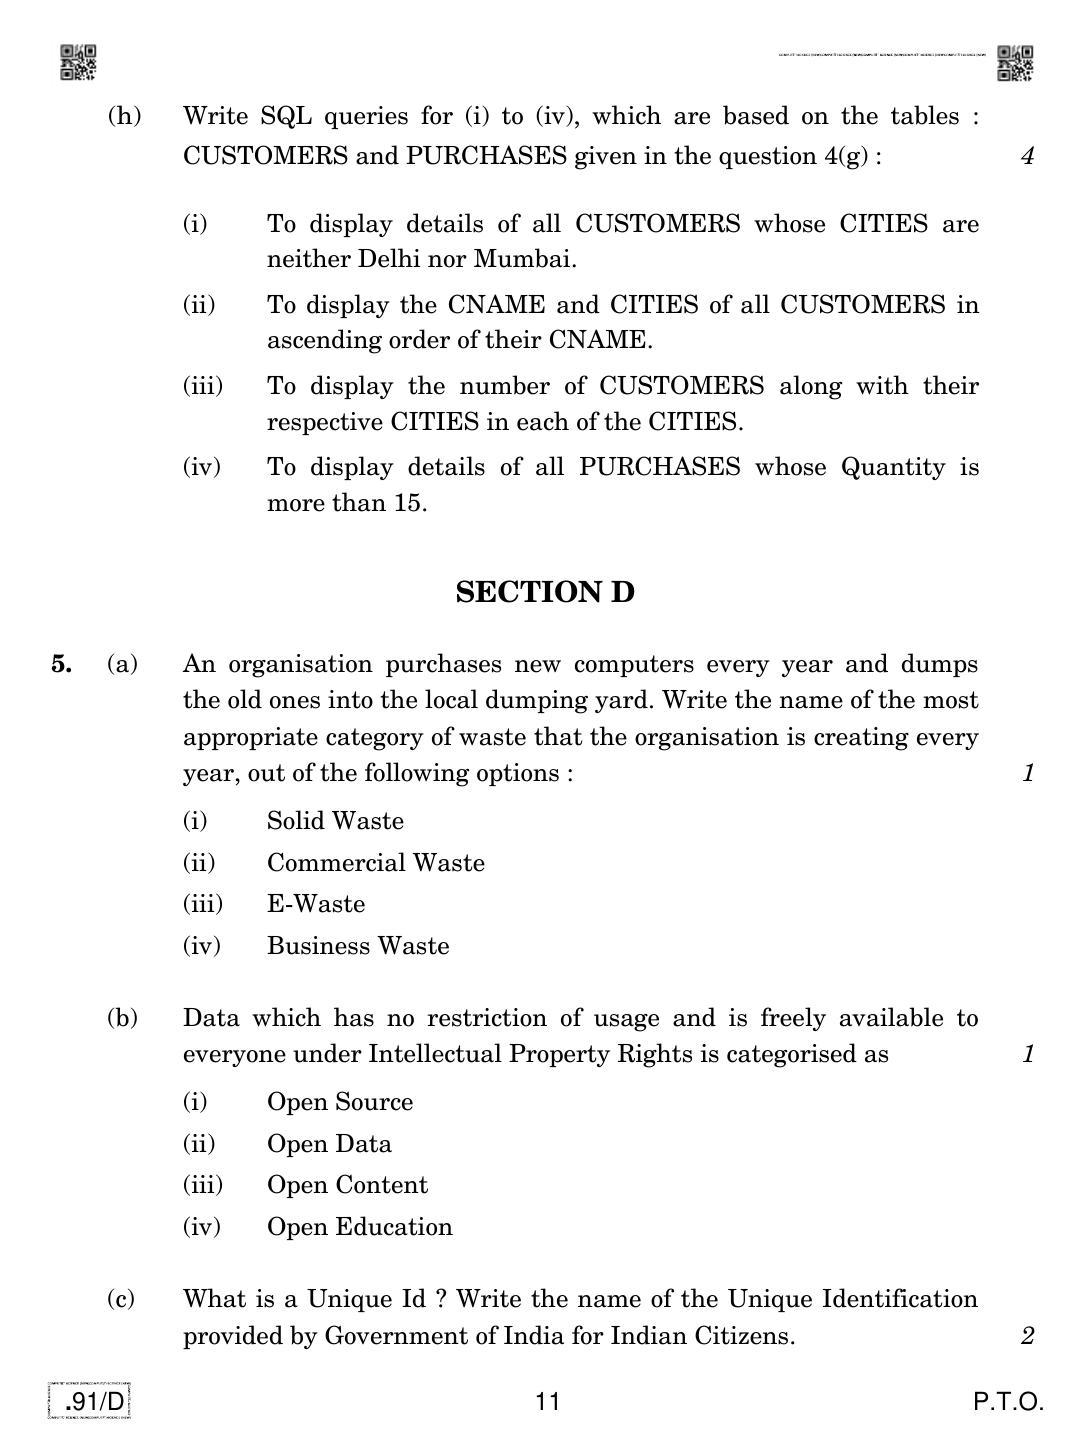 CBSE Class 12 CS 2020 Compartment Question Paper - Page 11